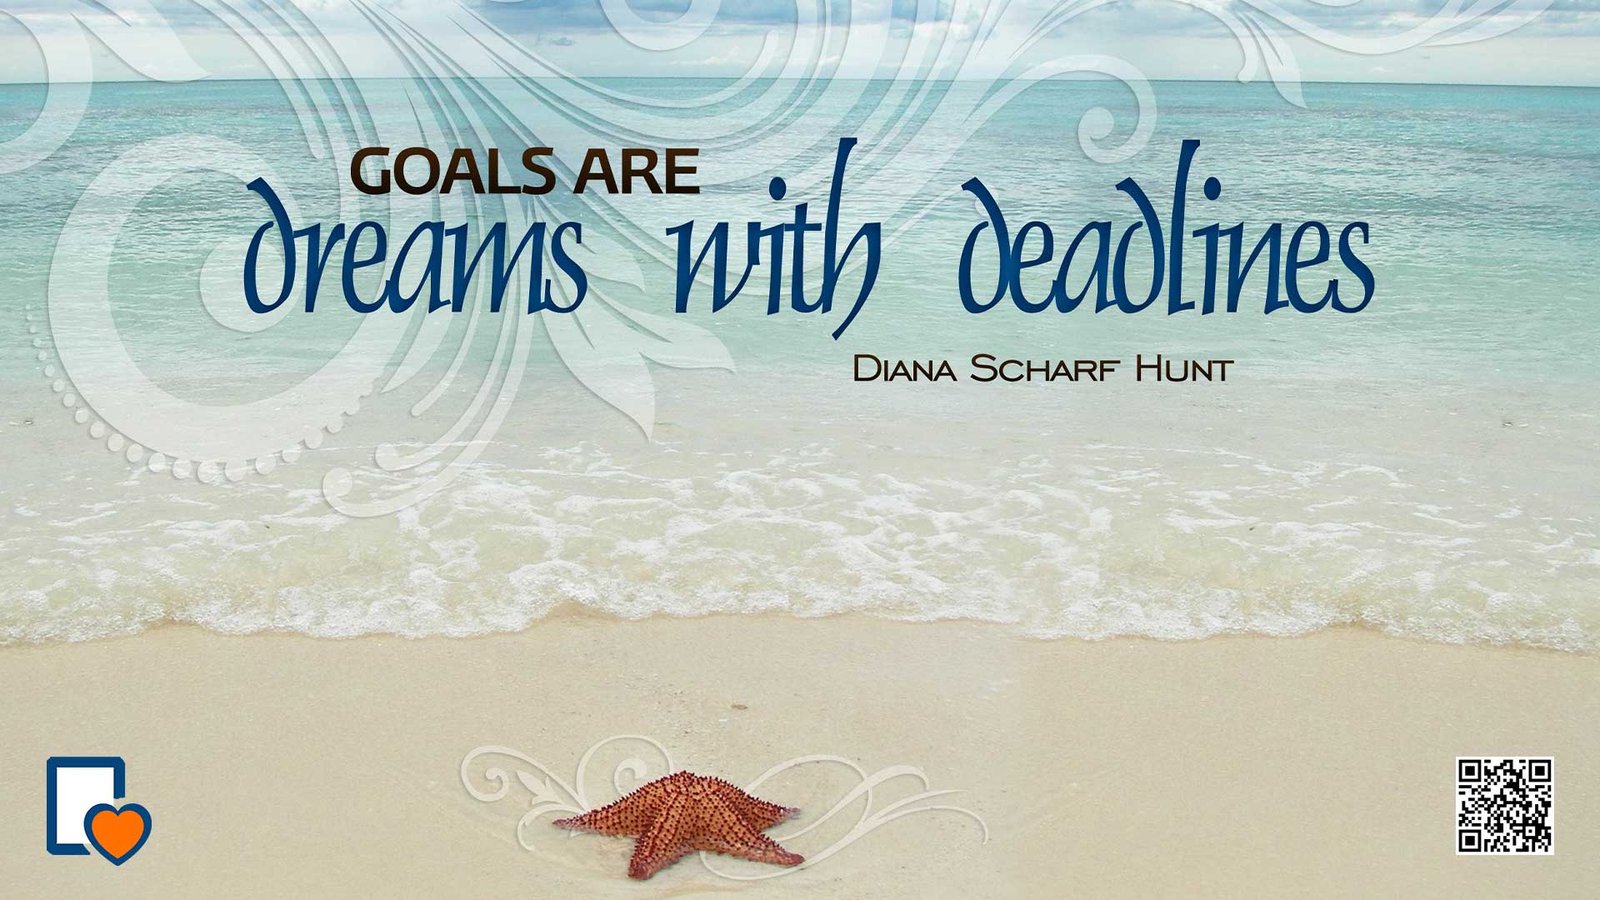 Dreams are Goals with Deadlines -Diana Scharf Hunt